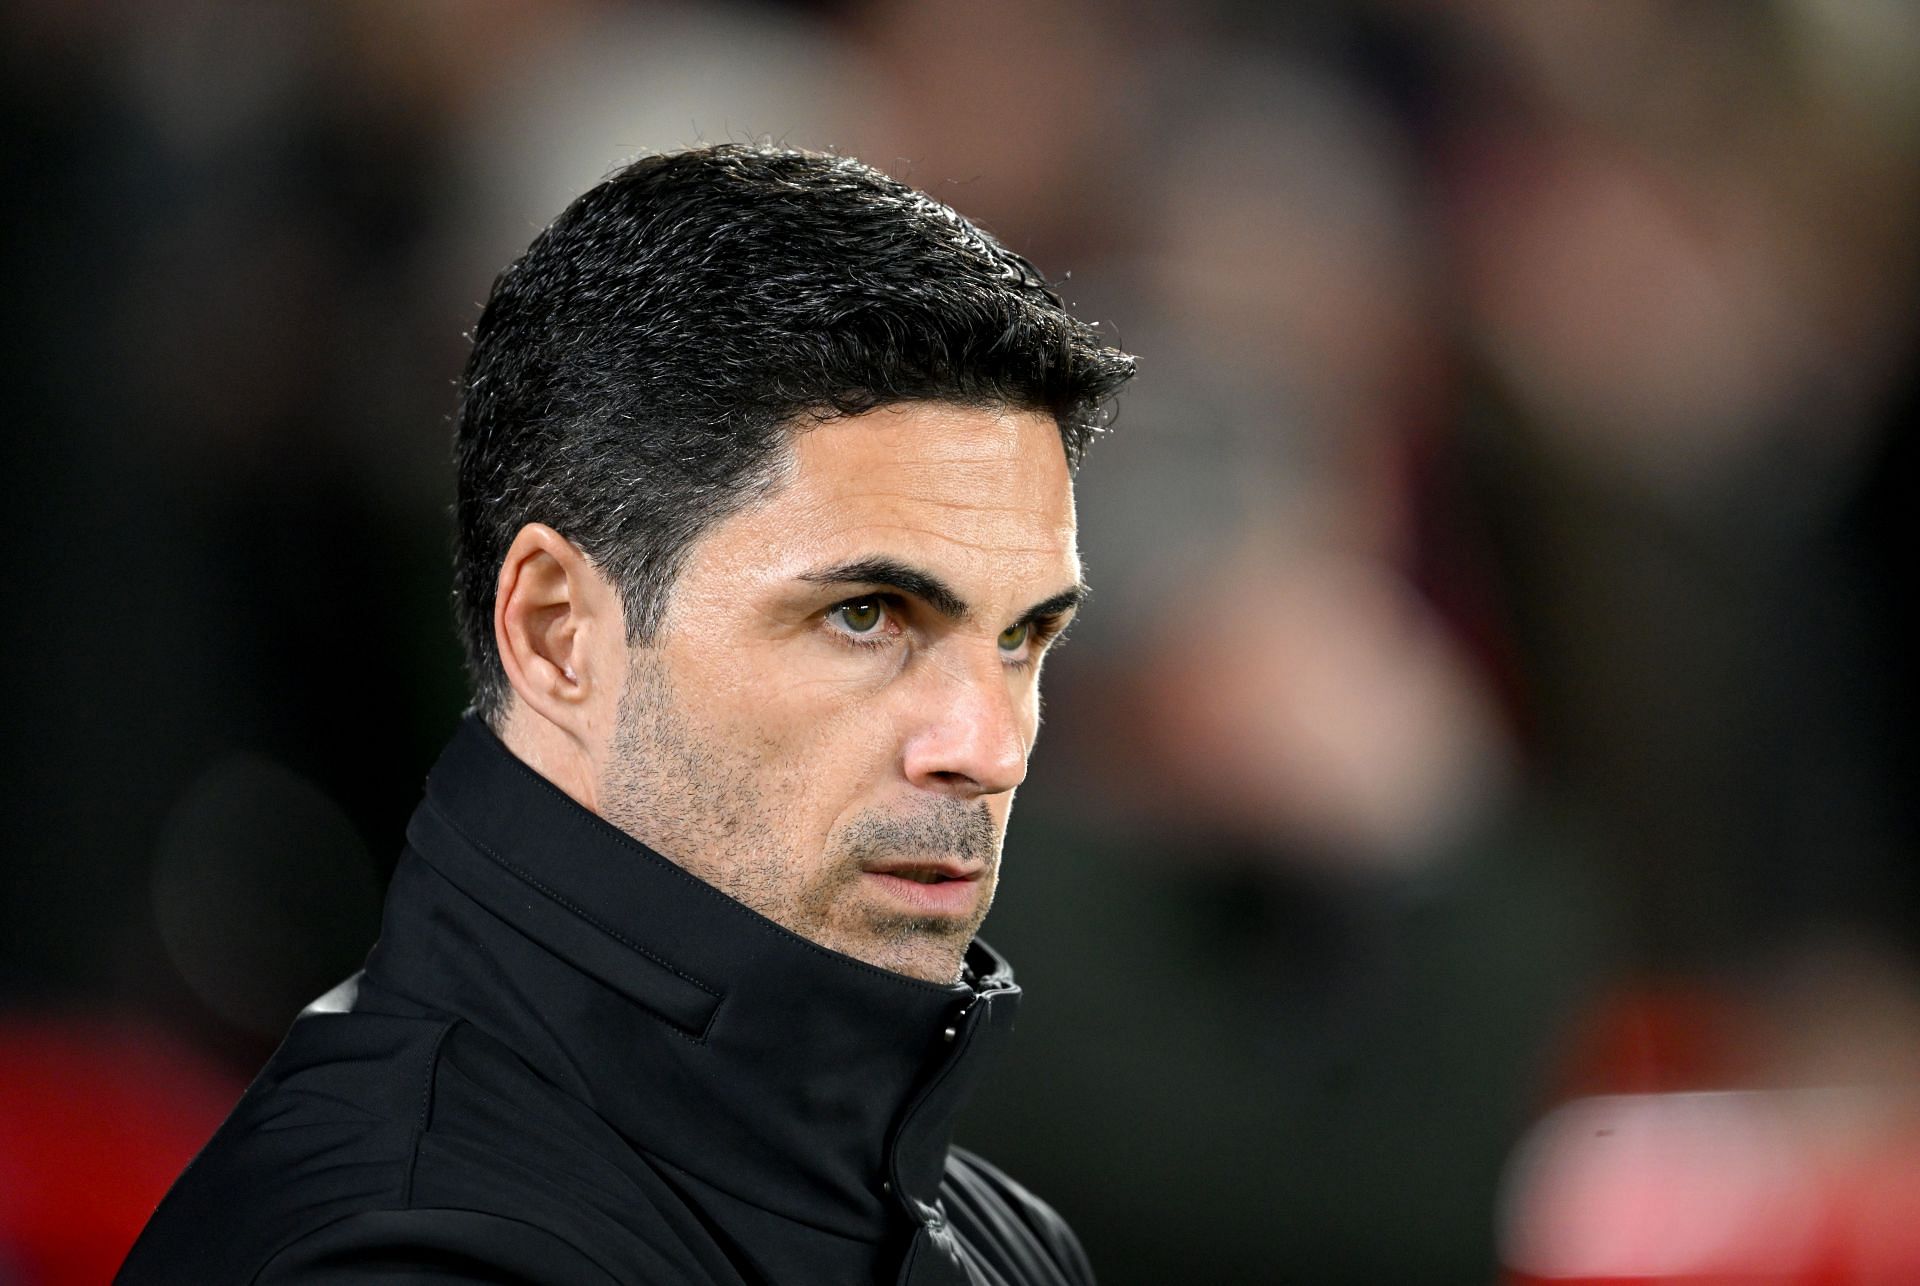 Mikel Arteta urged his side to be at their best.